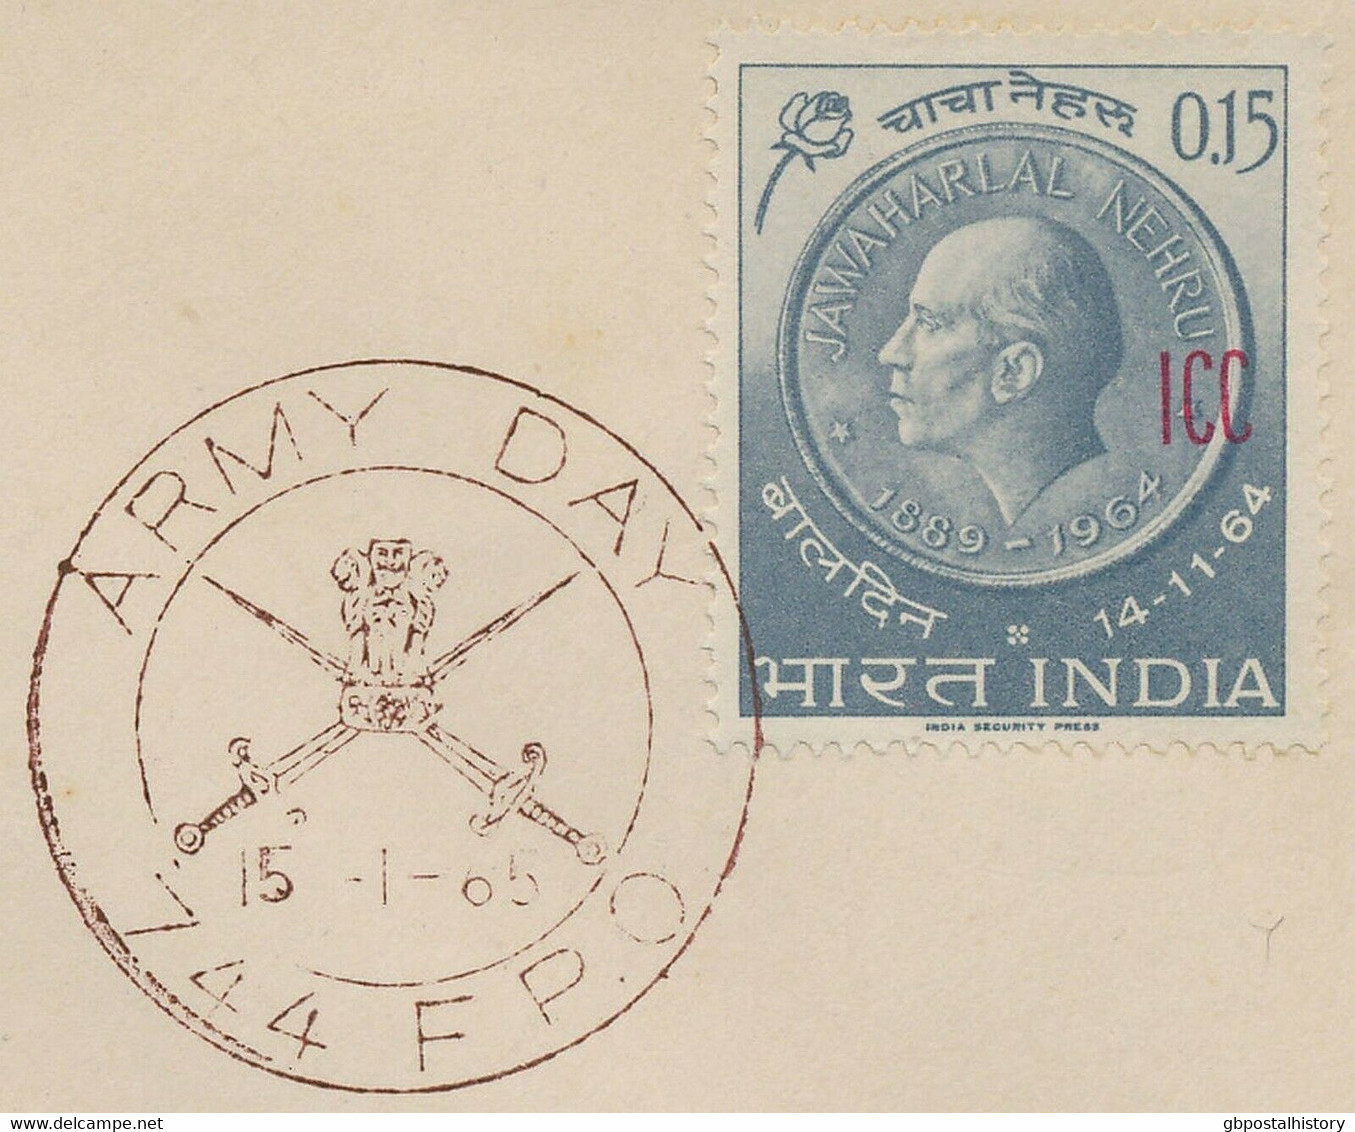 INDIA Indian Police Forces In Laos 1965 Army Day  "ARMY DAY / 744 F.P.O." FDC R! - Franquicia Militar